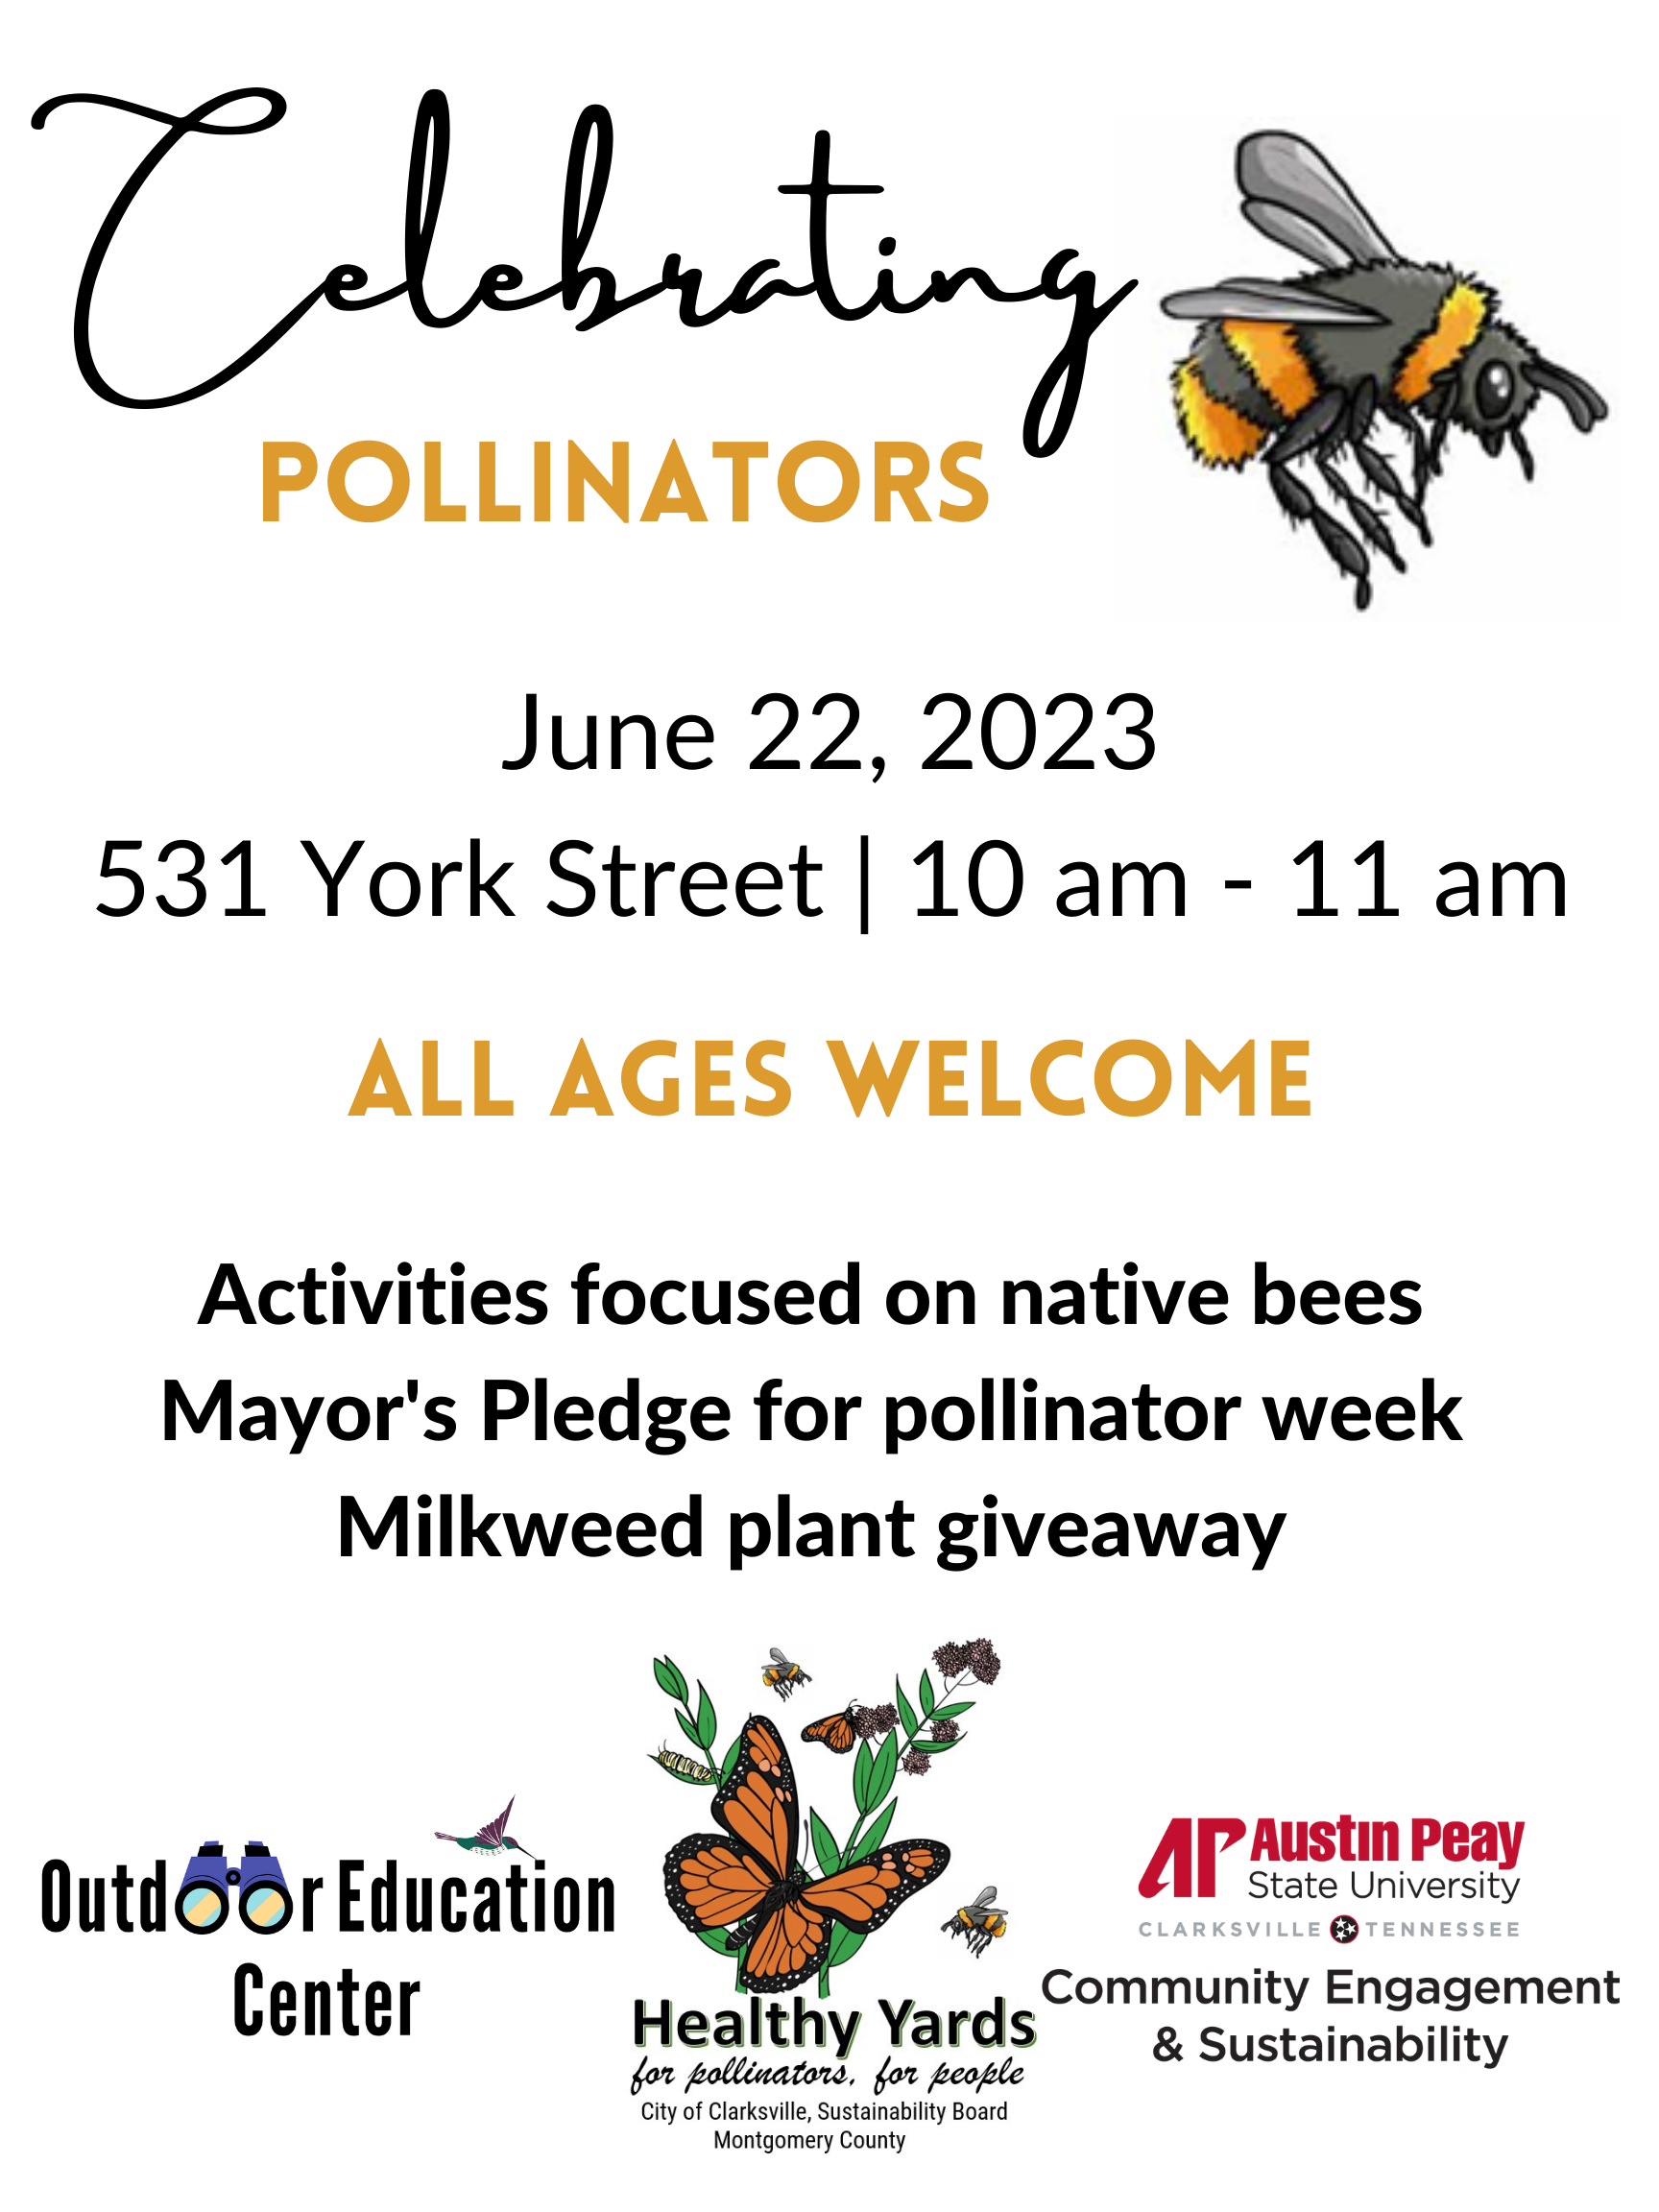 To celebrate Pollinator Week, Clarksville’s sustainability organization Healthy Yards is hosting a family-friendly event to raise awareness for local wildlife pollinators at 10 a.m. Thursday, June 22, at the Austin Peay State University (APSU) Outdoor Education Center, 530 York St.  The event will include fun activities and crafts for children and opportunities to learn about pollinators in the area.  “Kids are the future,” said Alexandra Wills, director of the APSU Office of Community Outreach and Sustainability, when asked about the importance of raising awareness about native plants and pollinators in Clarksville. “Getting our kids on board with thinking differently about our yards, homes and where we live by incorporating and including all of the insects and other little creatures is probably the best step we can take to think sustainably about our community.” Healthy Yards will discuss the identification and importance of native bees in Clarksville, followed by a native plant giveaway. Each family will receive one plant that helps attract native butterflies and bees to the area. Clarksville Mayor Joe Pitts will attend to announce the Mayor’s Monarch Pledge, which focuses on protecting native pollinators in Clarksville, specifically bees and monarch butterflies. Through initiatives like Healthy Yards, Clarksville hopes to address monarch butterflies’ declining population in the United States. "In 2022, monarchs were listed as federally endangered in the United States and, in the Eastern U.S., their populations have gone down by at least 80%,” said Michelle Rogers, outreach and environmental education coordinator for the Center of Excellence for Field Biology. “It’s because of habitat loss and pesticide use. The mayor has signed on to agree to do things that will help Clarksville provide more habitat for monarchs.”  This is a free event that requires no pre-registration. Children and adults of all ages are welcome. Parking for the event is on the corner of Forbes and Robb avenues, and signs will be posted to direct traffic.  In addition to Celebrating Pollinators, Healthy Yards is hosting other events throughout June to raise awareness and support for local wildlife. As part of Pollinator Week, Healthy Yards will have events such as “Community Garden Workday” and “We Grow Wednesday” on June 21. They will also celebrate “Pollinator Count Day” and provide an ecology-based pollinator walk on June 23. To finish the week, Healthy Yards will honor Pollinator Day at the downtown farmers market, featuring a native plant giveaway, and a pollinator hike on June 24.  Rogers explained the significance of insects and native plants in Clarksville, which Healthy Yards events aim to promote.  “If you want to have healthy ecosystems, you have to have insects,” she said. “If you want to have insects, you have to have native plants. You have to have them for the rest of the ecosystem we all depend on – for food security, for clean water, for clean air, it all happens because of healthy ecosystems.”  For further information on Healthy Yards and its upcoming events, see the resources below: https://www.facebook.com/HealthyYardsCMC/ https://www.apsu.edu/field-biology/healthy-yards.php